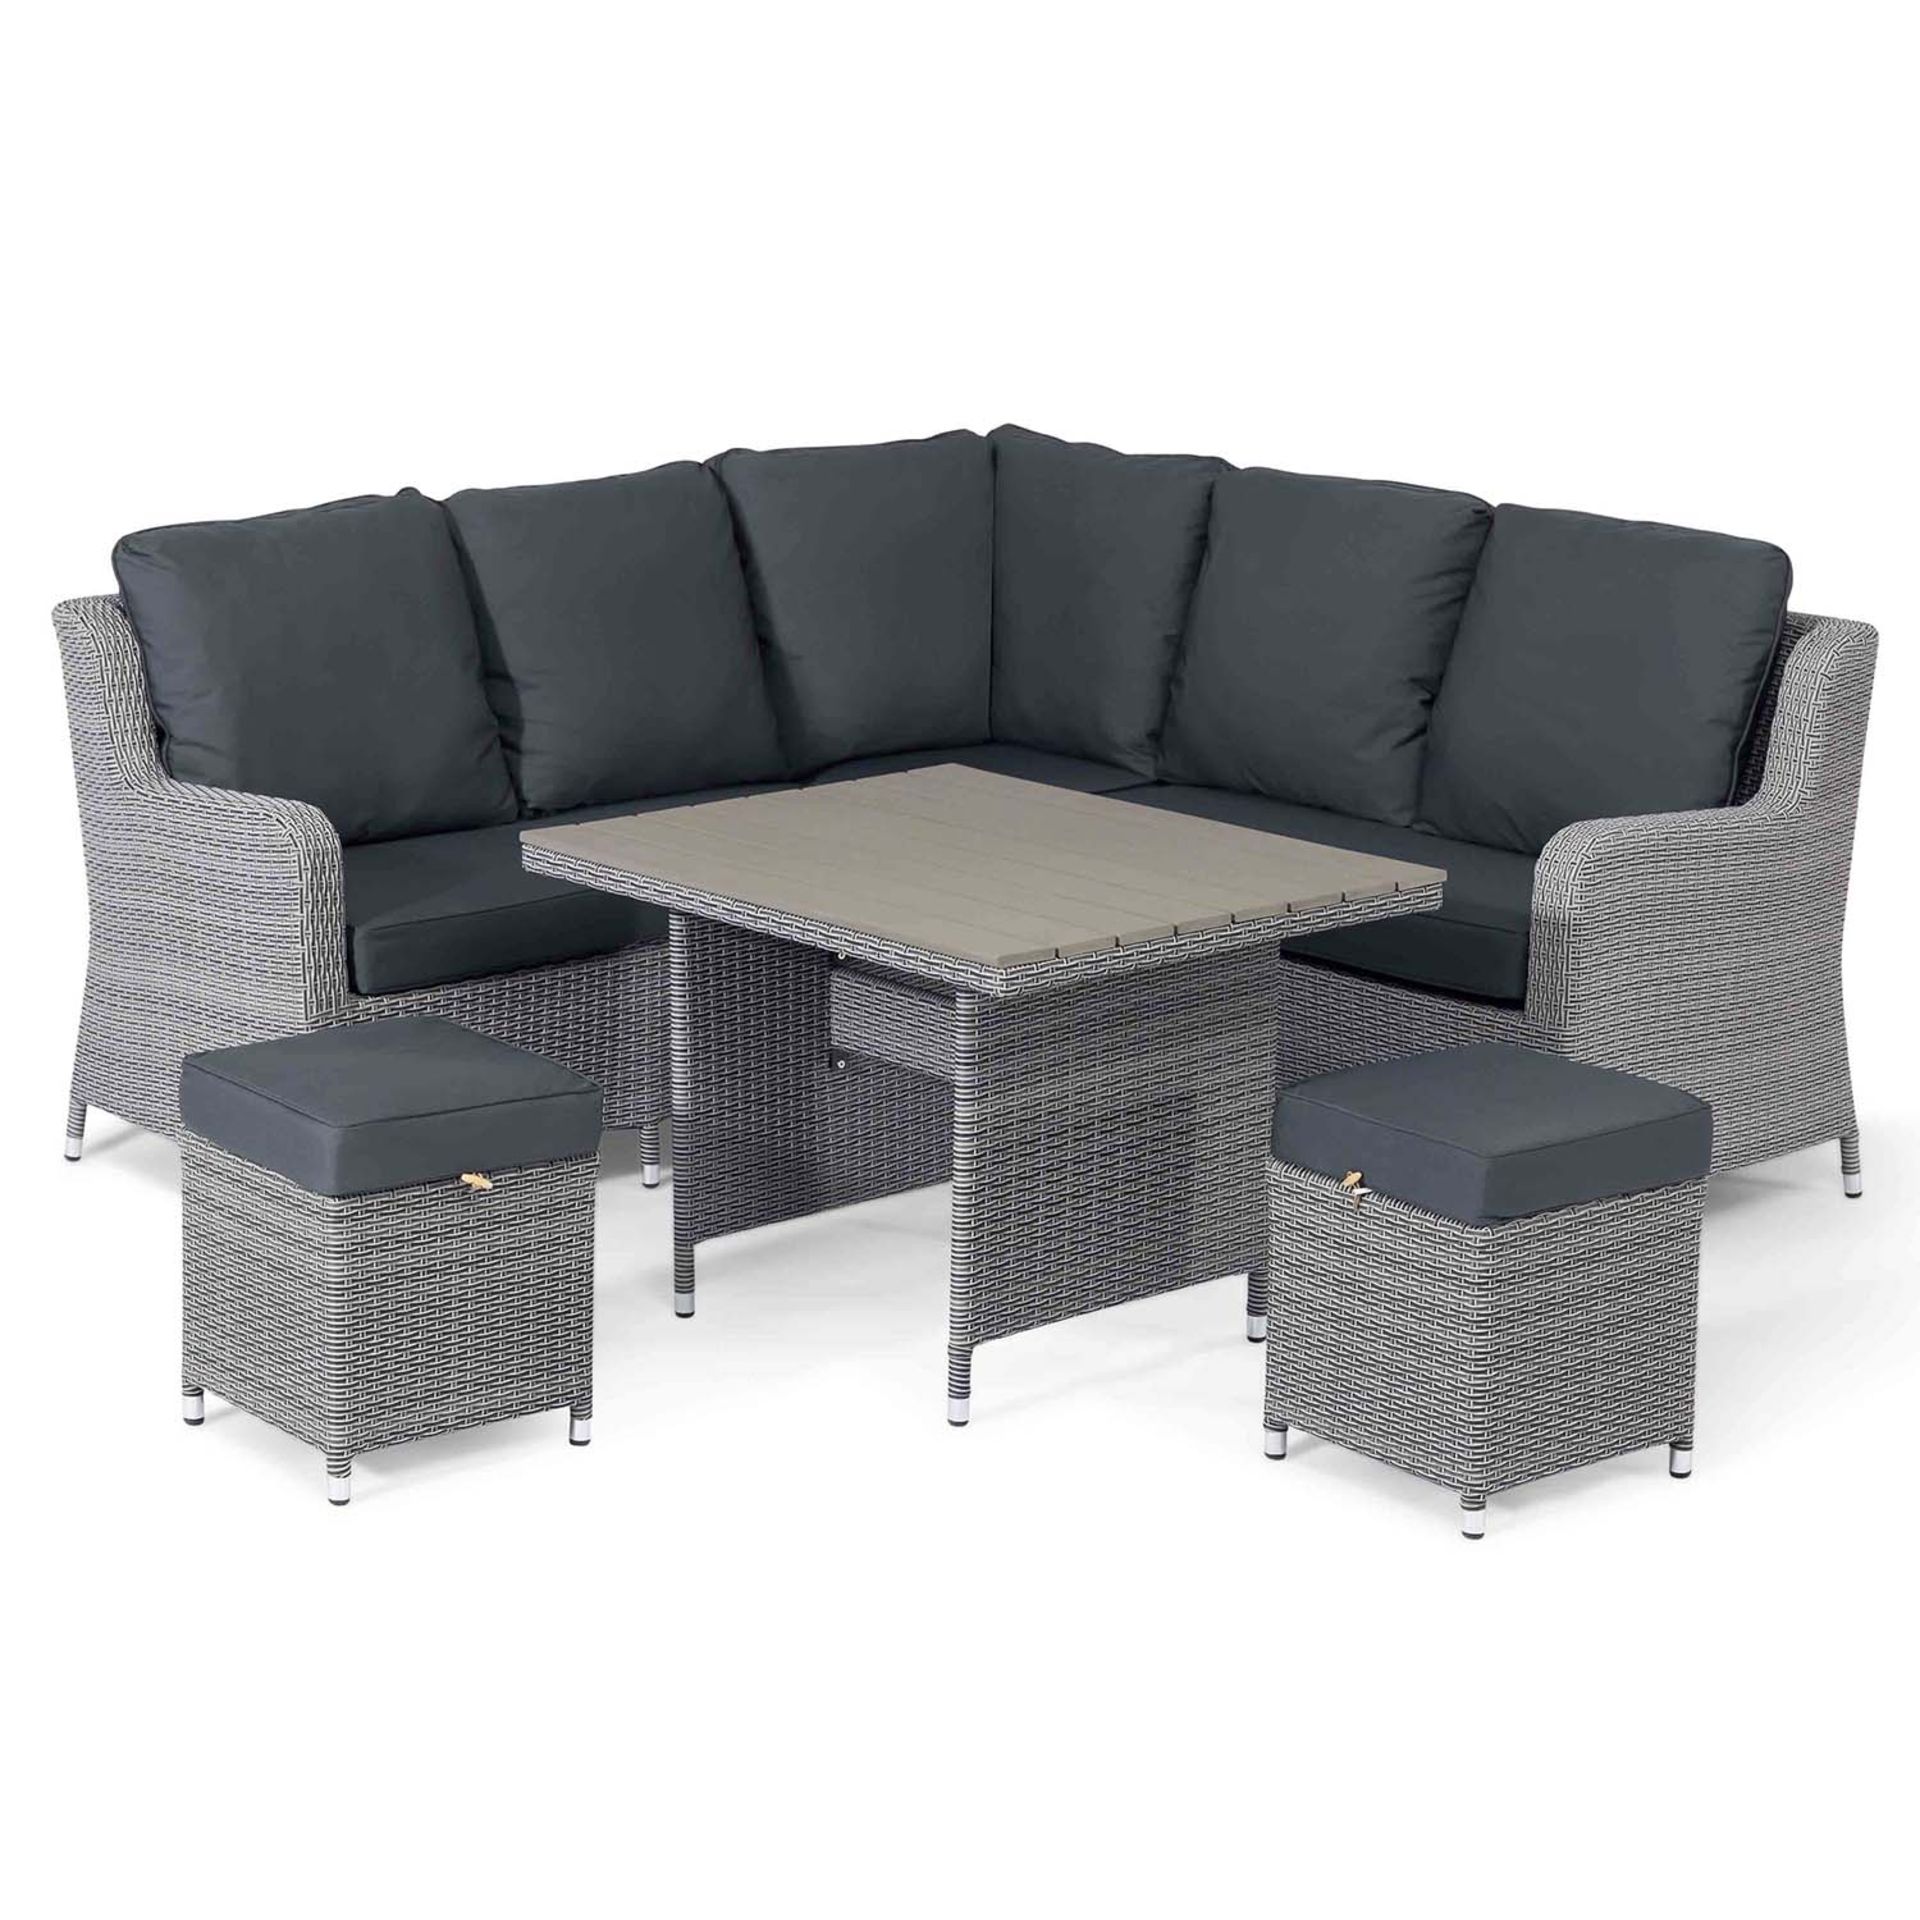 Rattan Outdoor Cambridge Corner Dining Set With Polywood Top (Grey) *BRAND NEW* RRP £1099